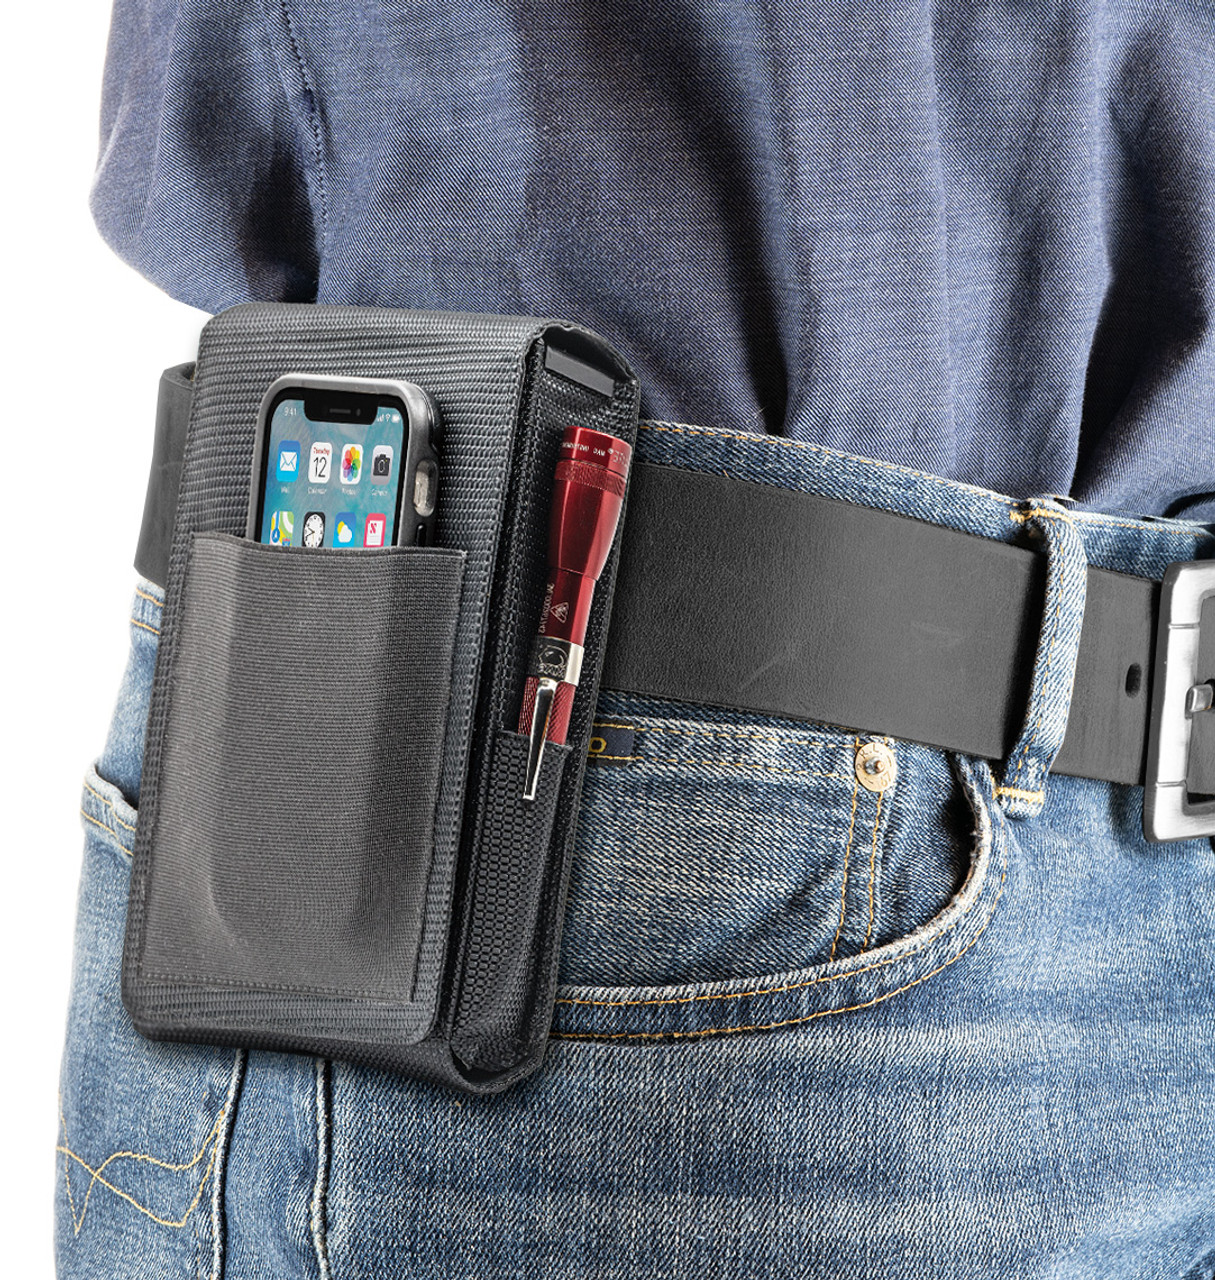 The Glock 29 Perfect Holster